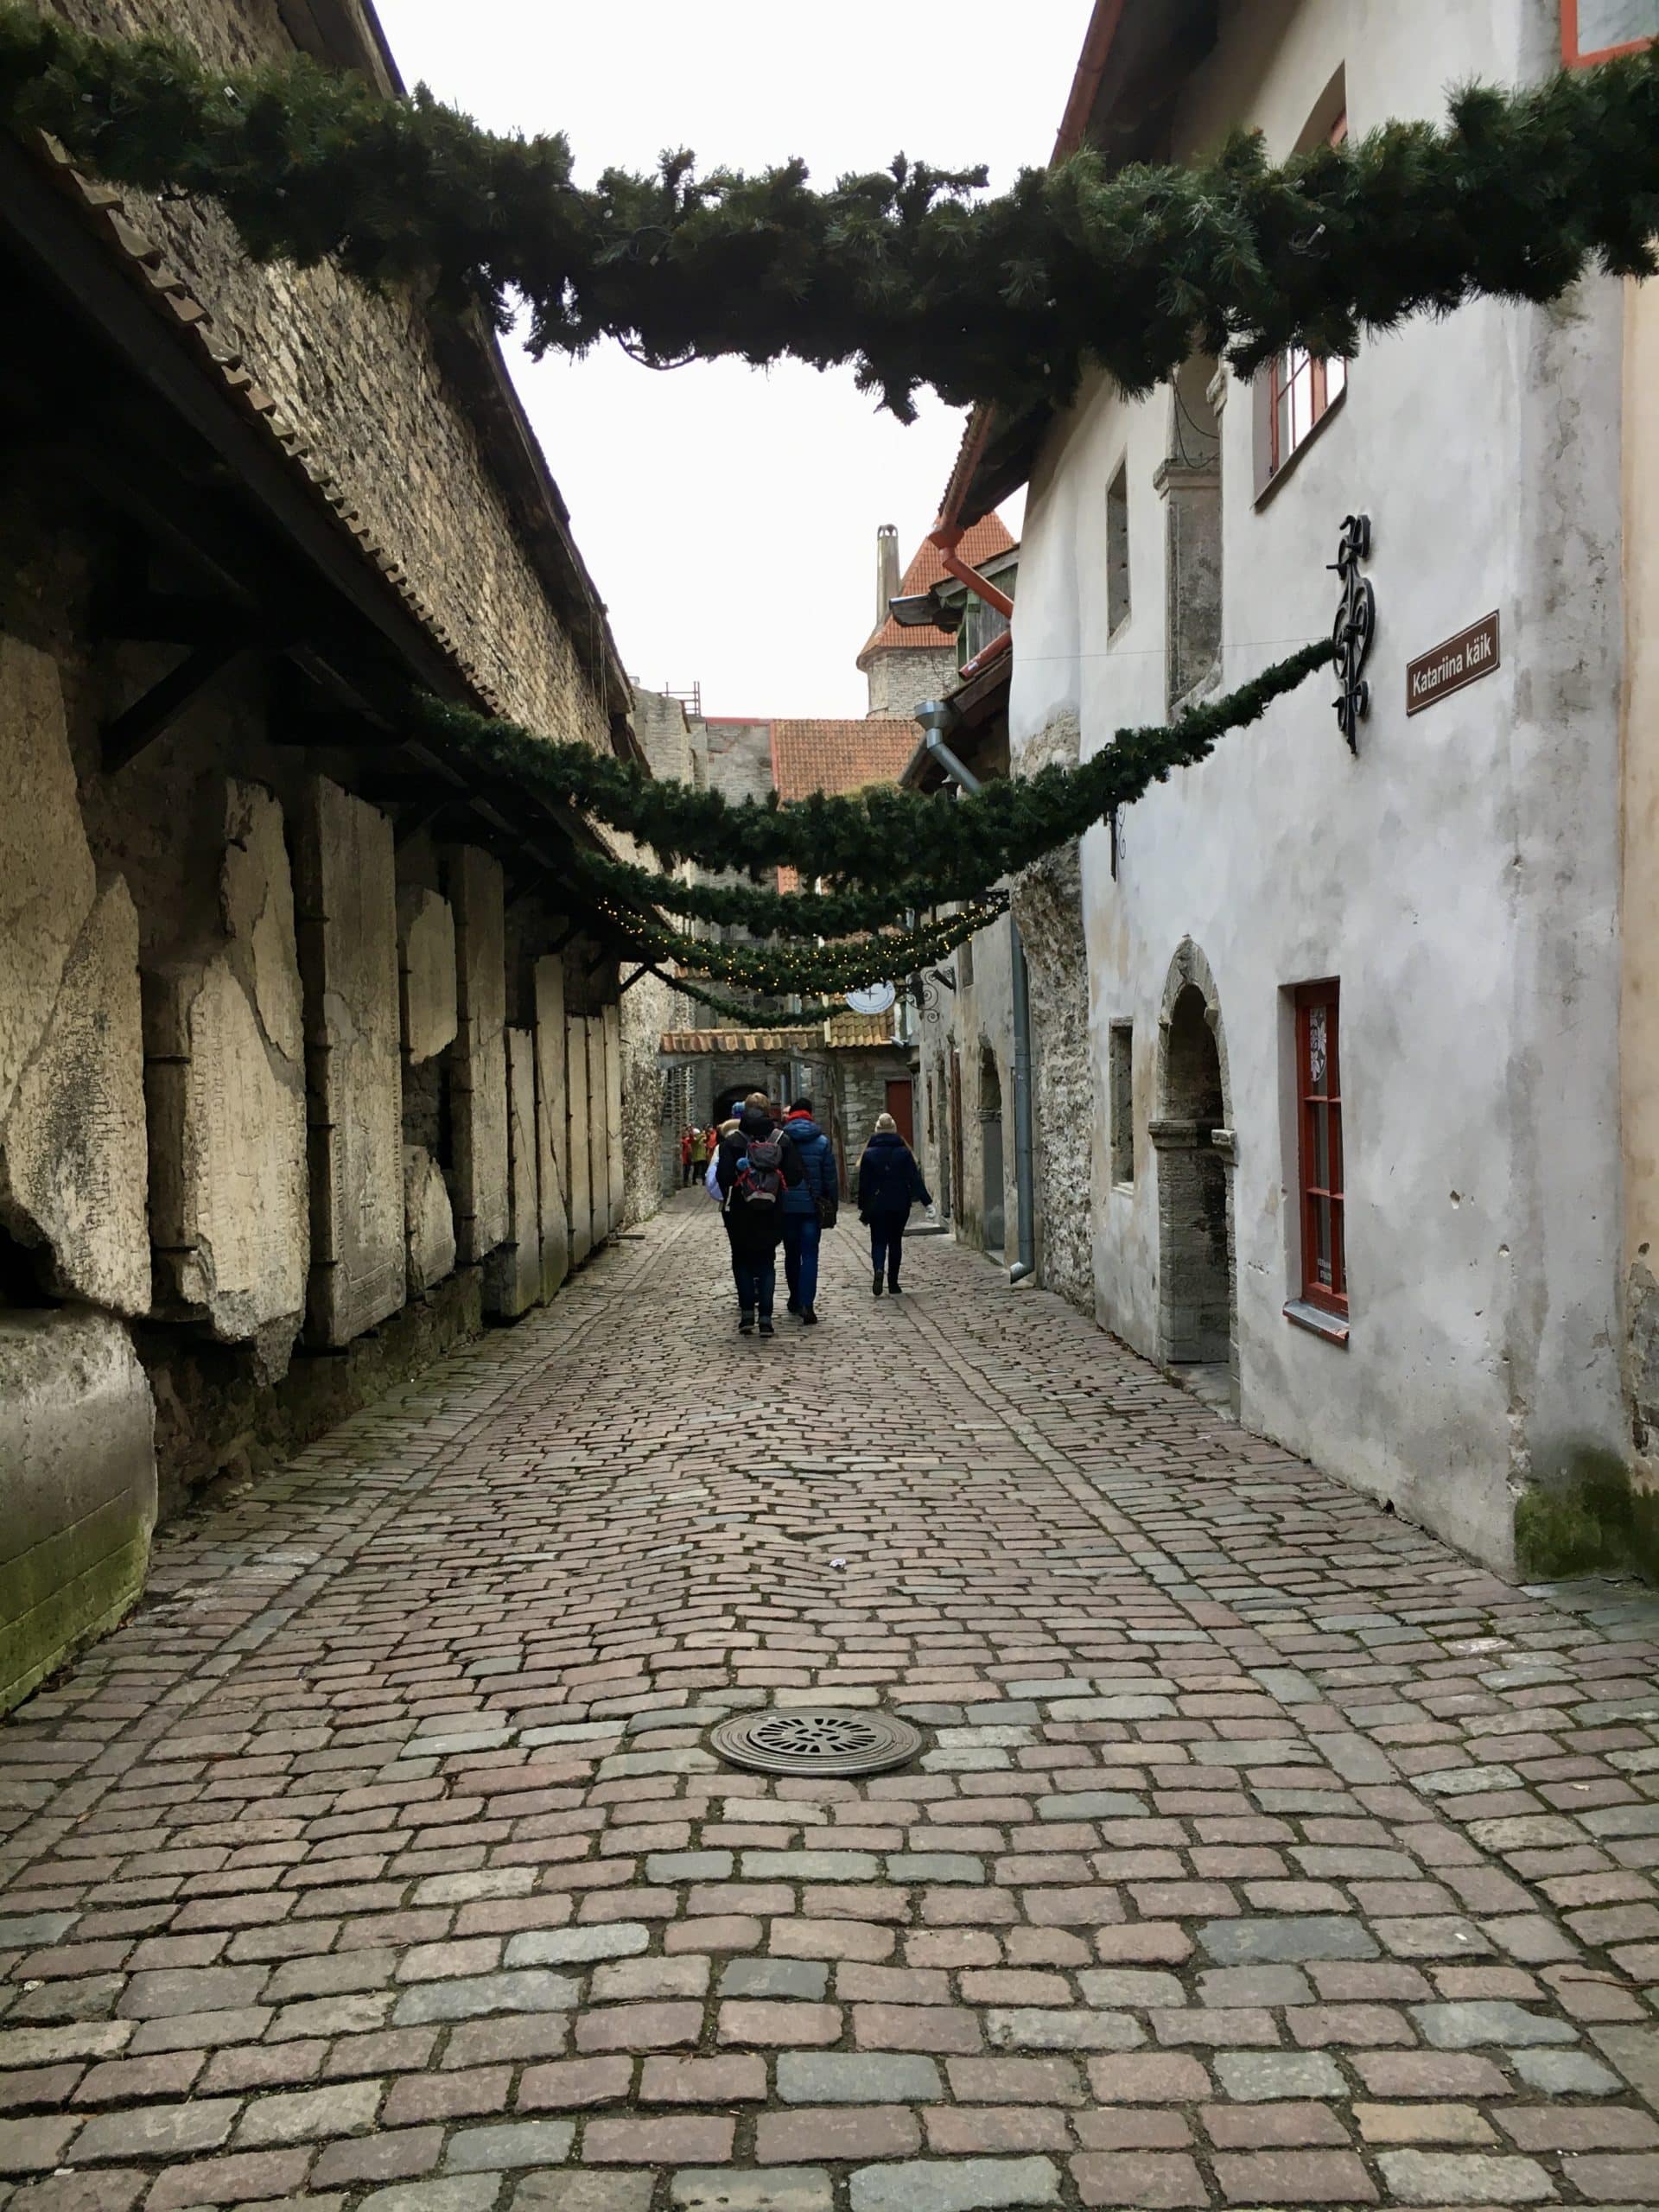 Tallinn Christmas Market – Trip to the Middle Ages